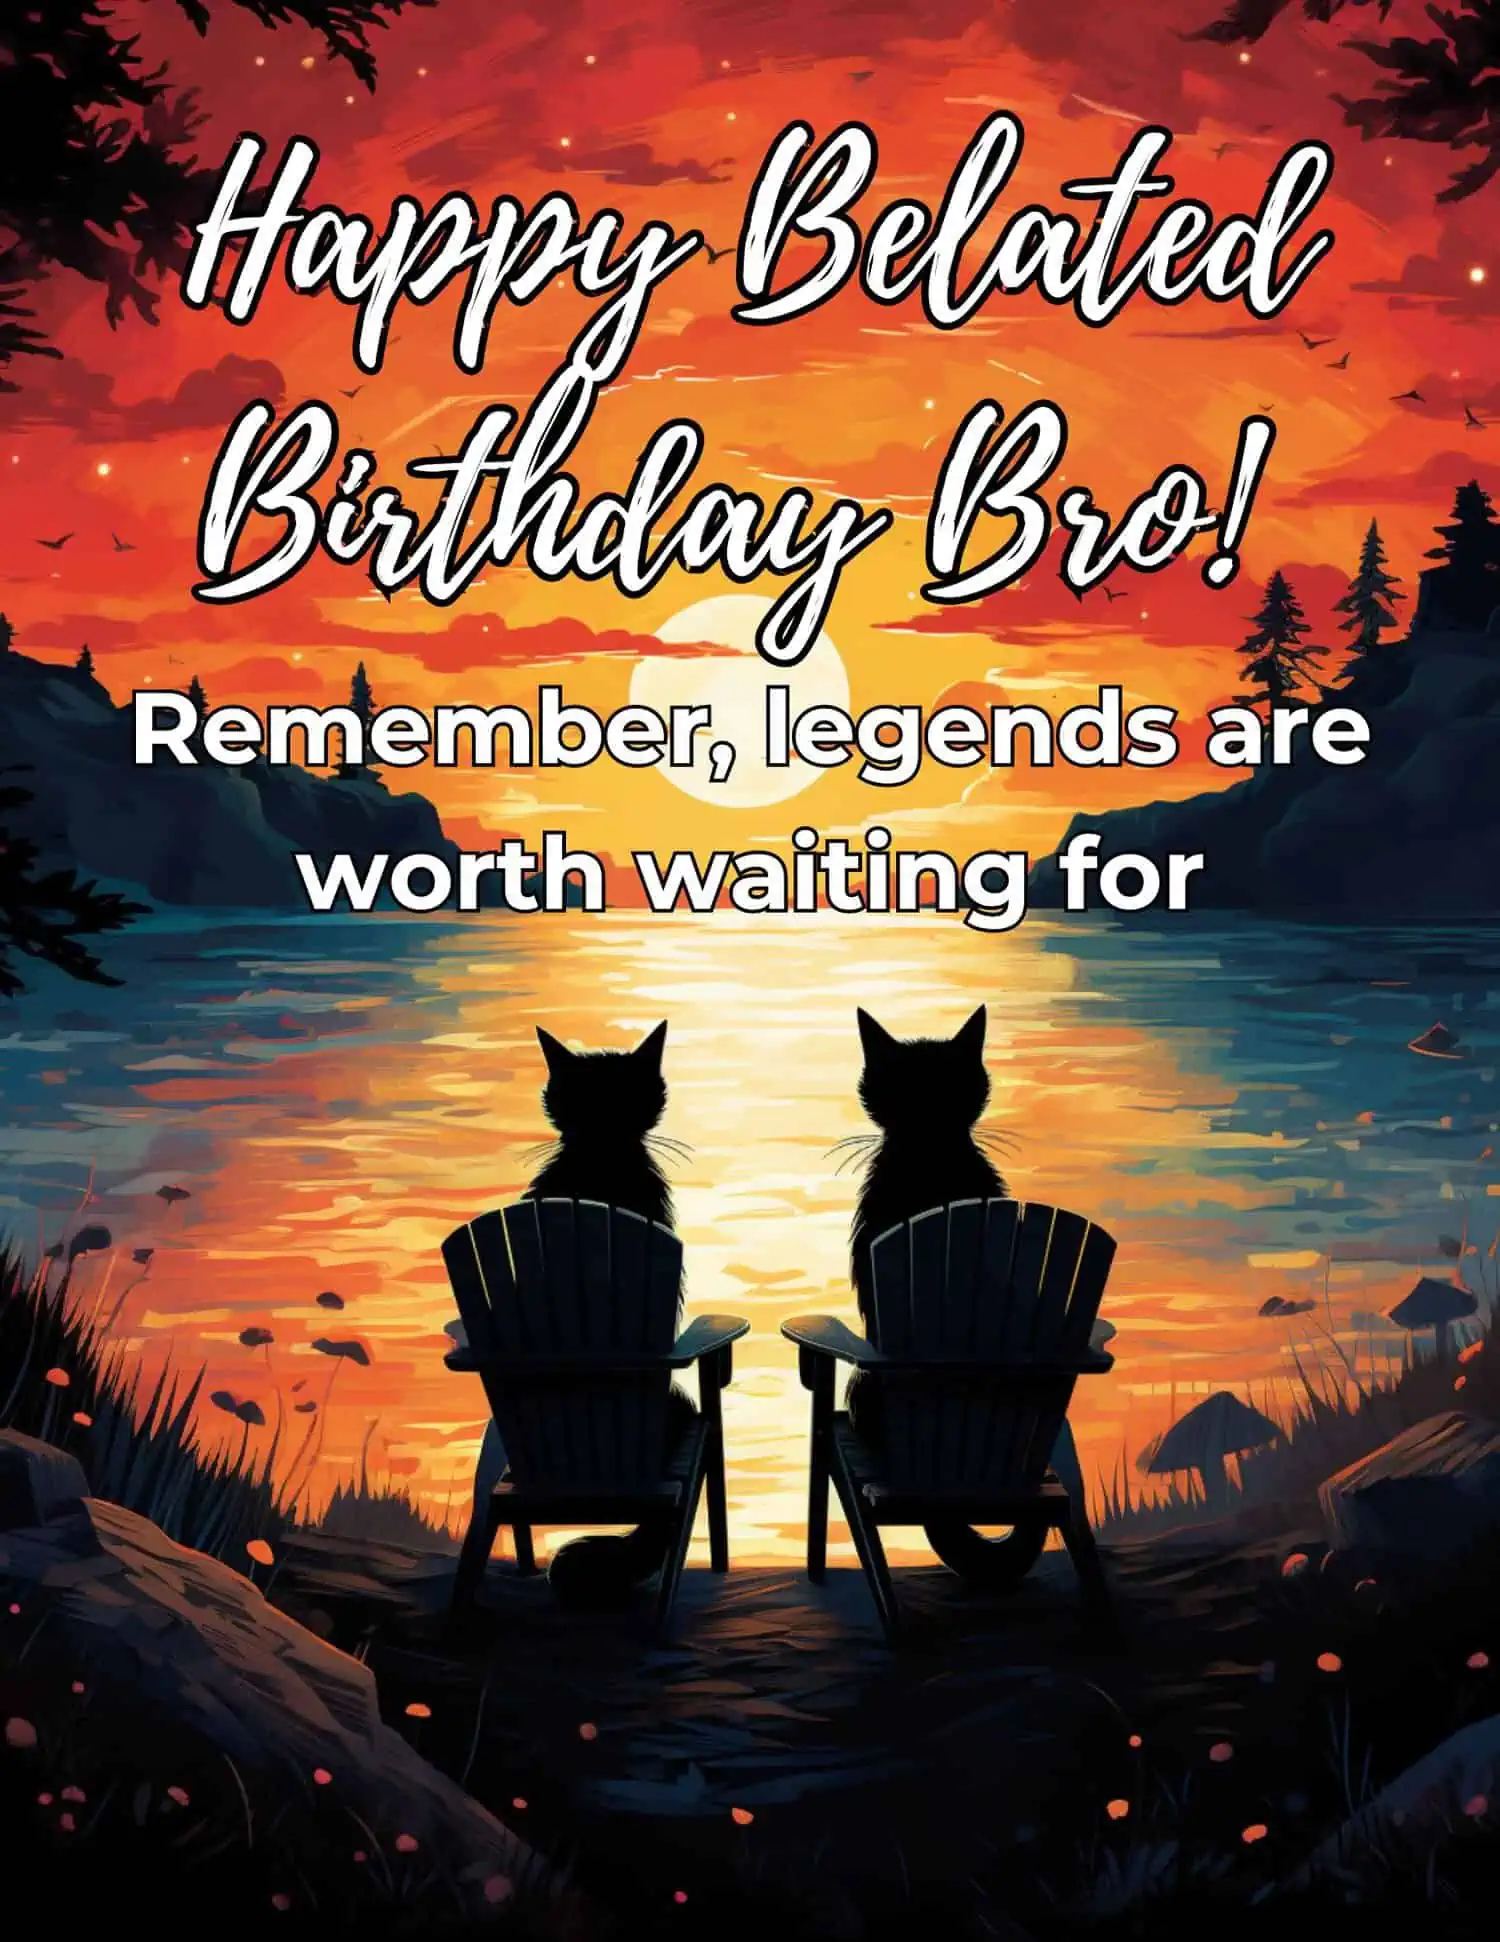 A thoughtful collection of belated birthday wishes crafted for brothers, combining warmth and humor to make up for a missed birthday and reinforce the special bond shared.